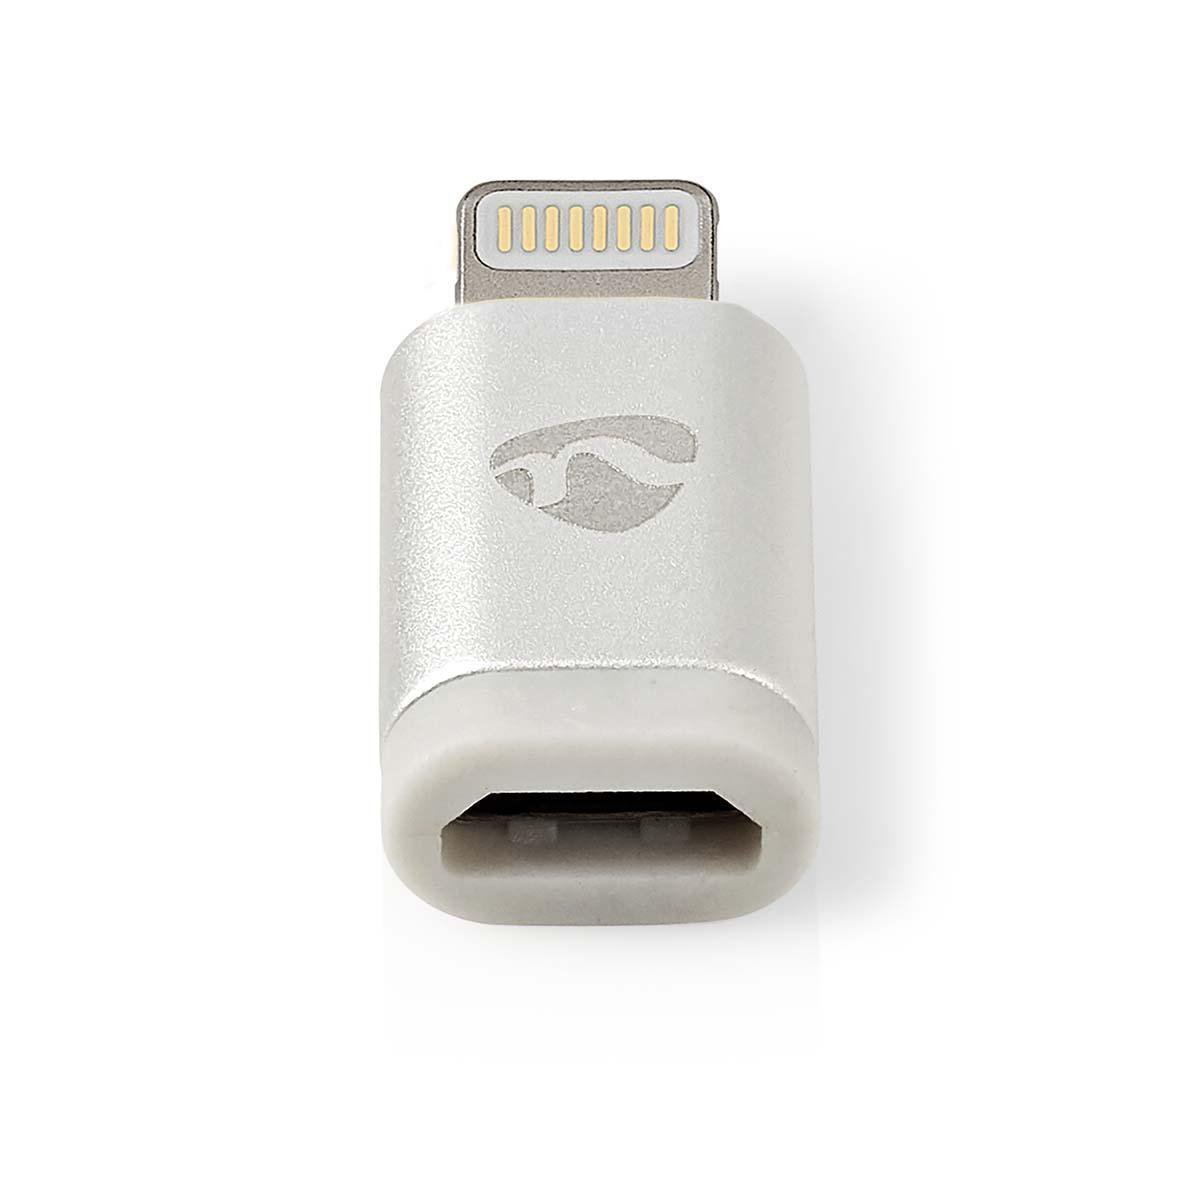 Sync and Charge Adapter 8-pin Lightning Male to USB 2.0 Micro-B Female